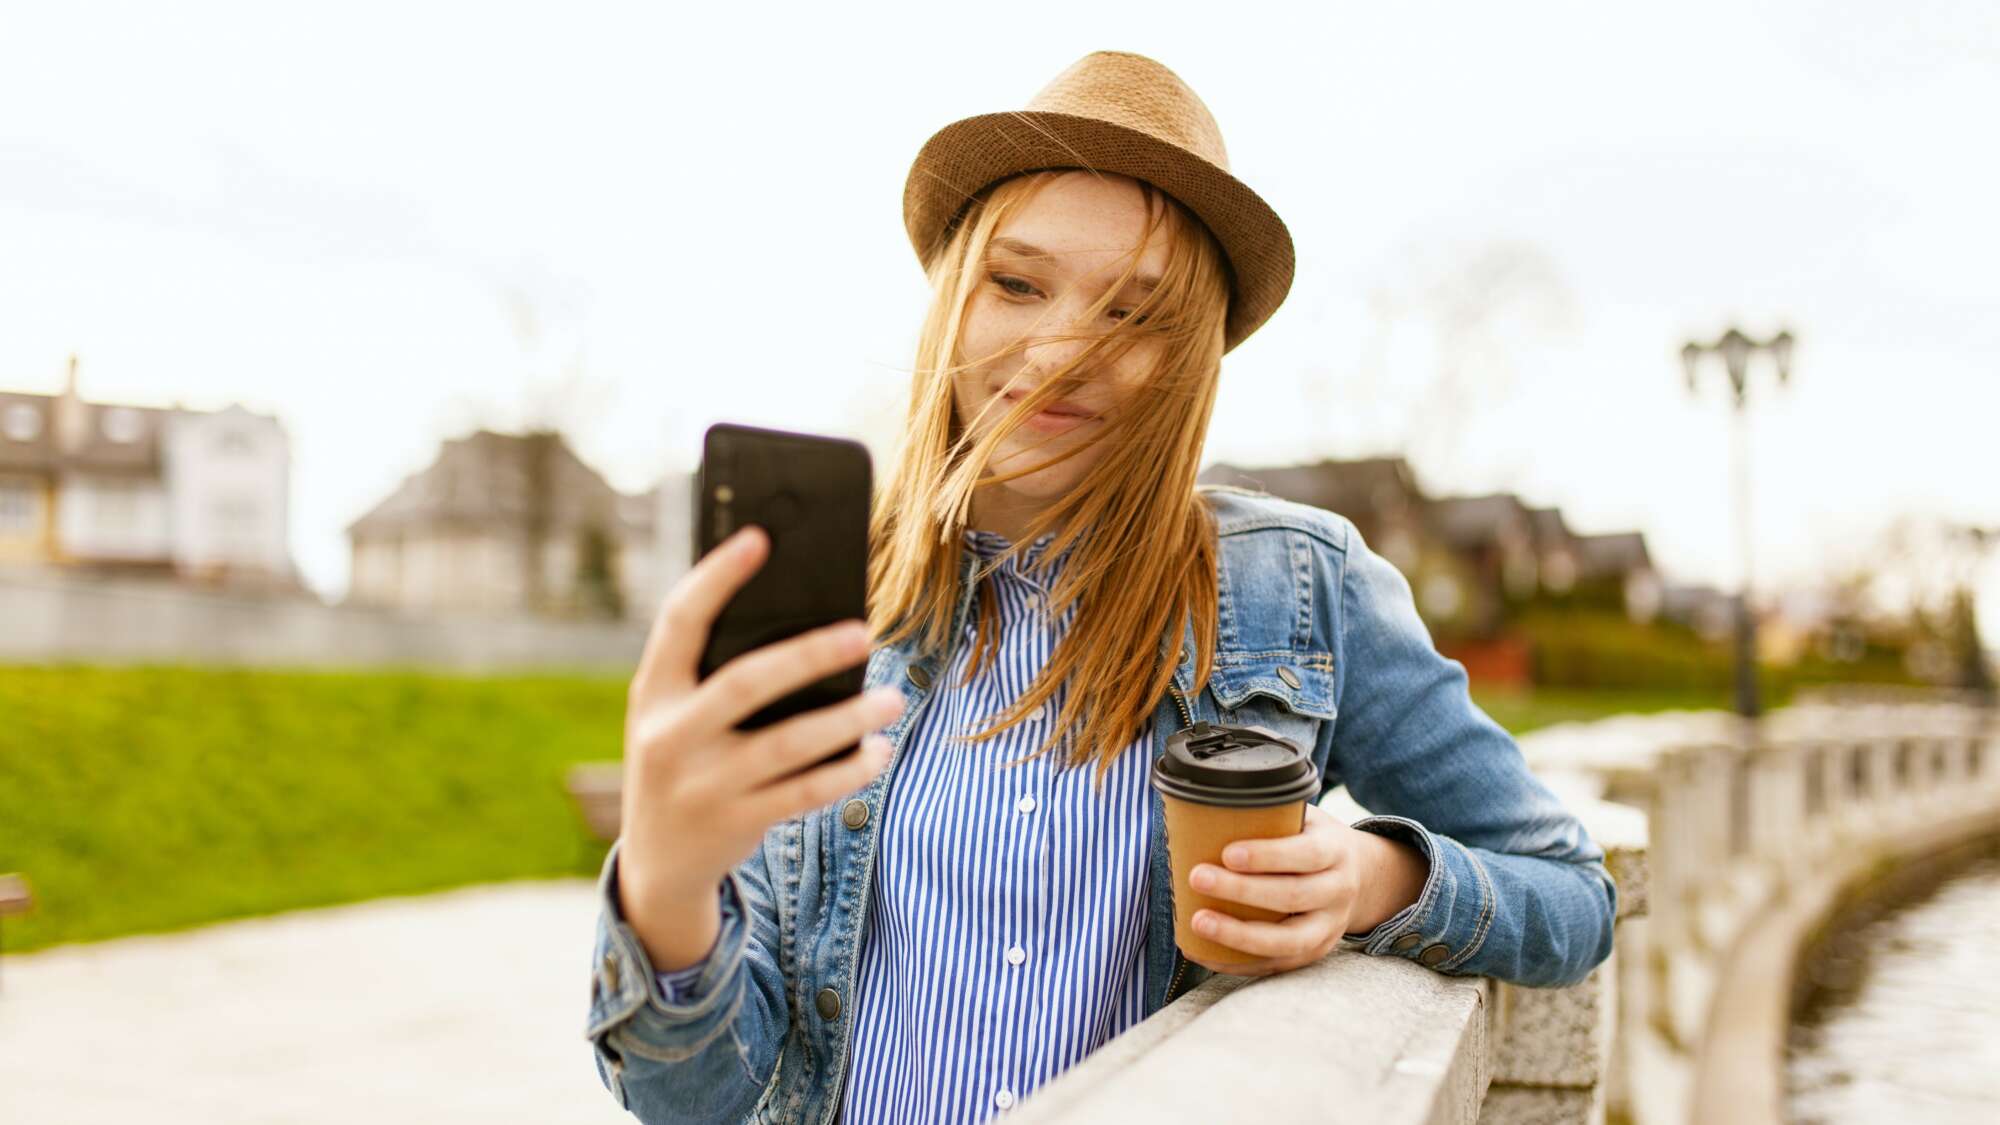 Woman waeing fedora and holding phone taking a selfie with coffee cup